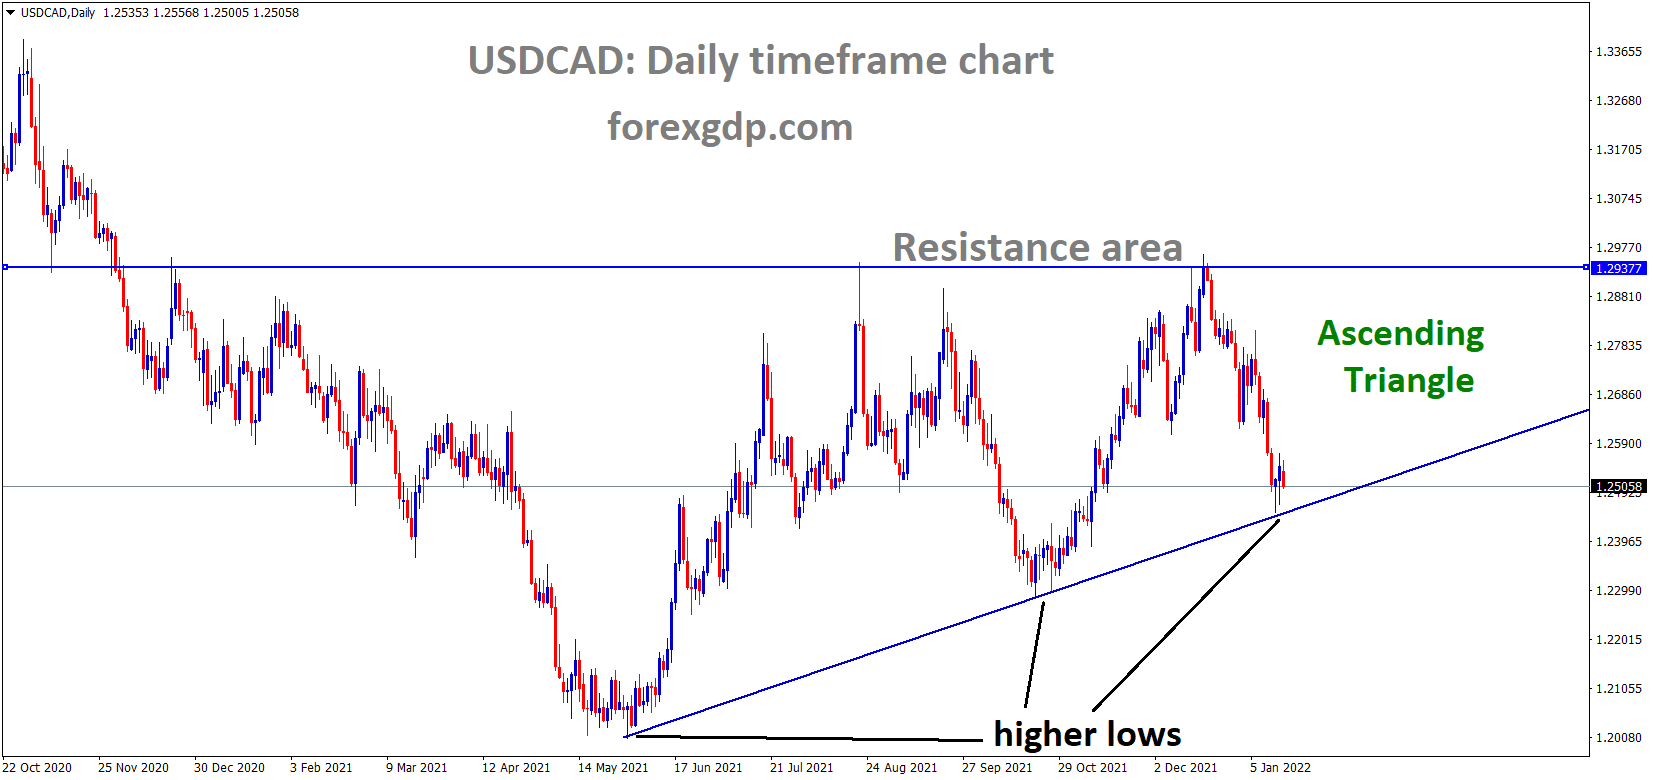 USDCAD is moving in an Ascending triangle pattern and the market has rebounded from the higher low area of the triangle pattern.